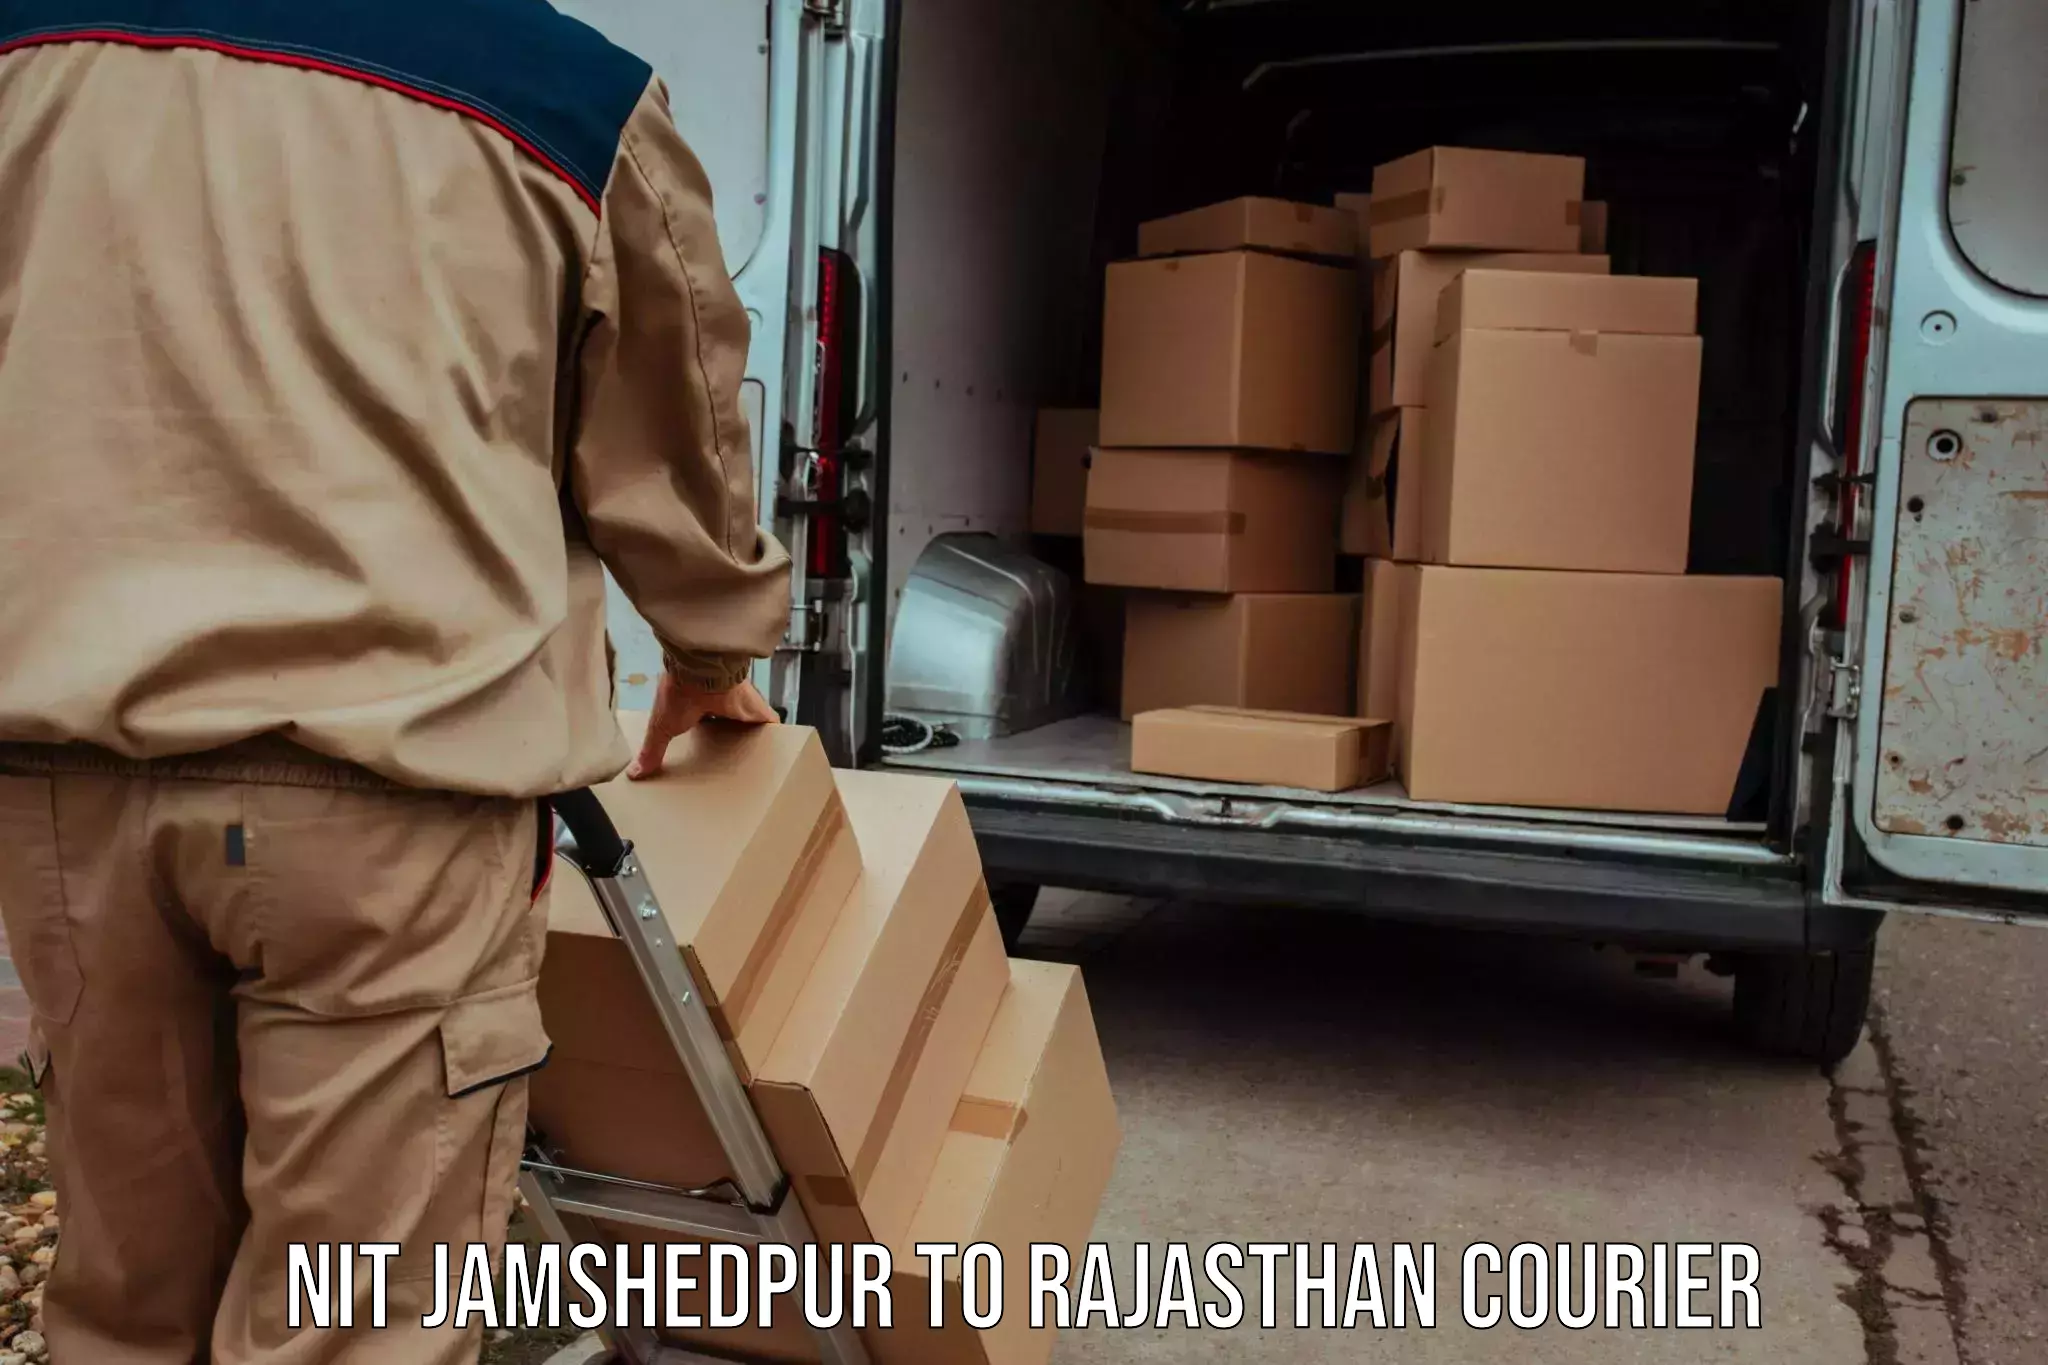 24-hour courier service NIT Jamshedpur to Nasirabad